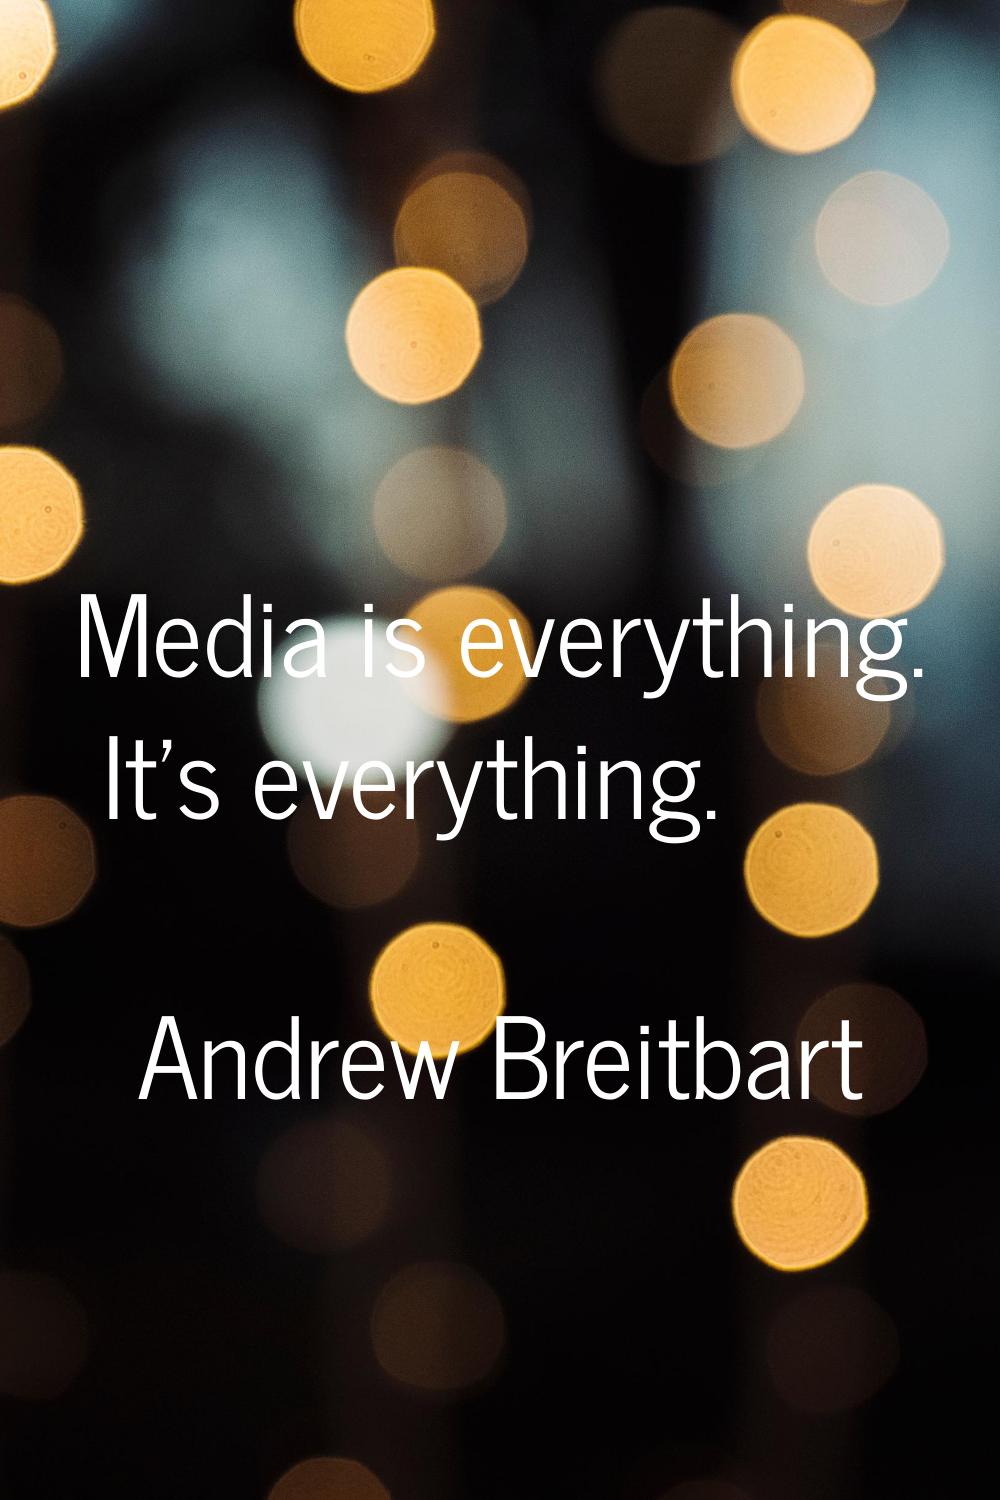 Media is everything. It's everything.